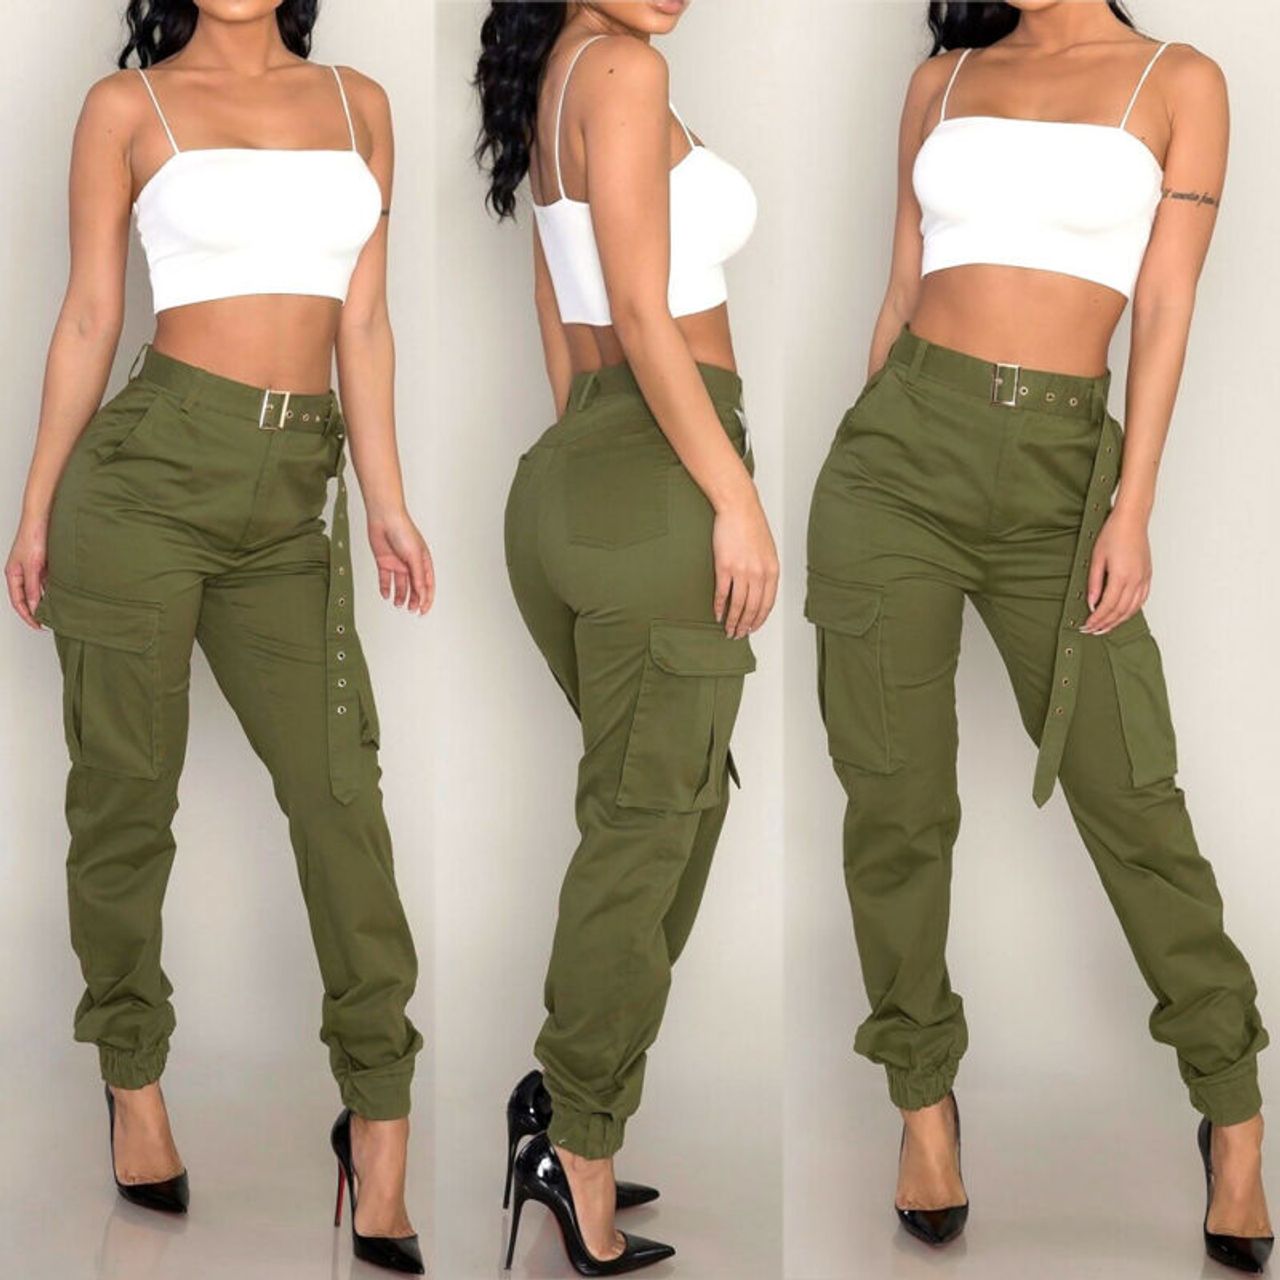 Girls Pants Trousers & Cargos - Buy Trousers,Cargos & Pants For Girls  Online in India At Best Prices - Flipkart.com